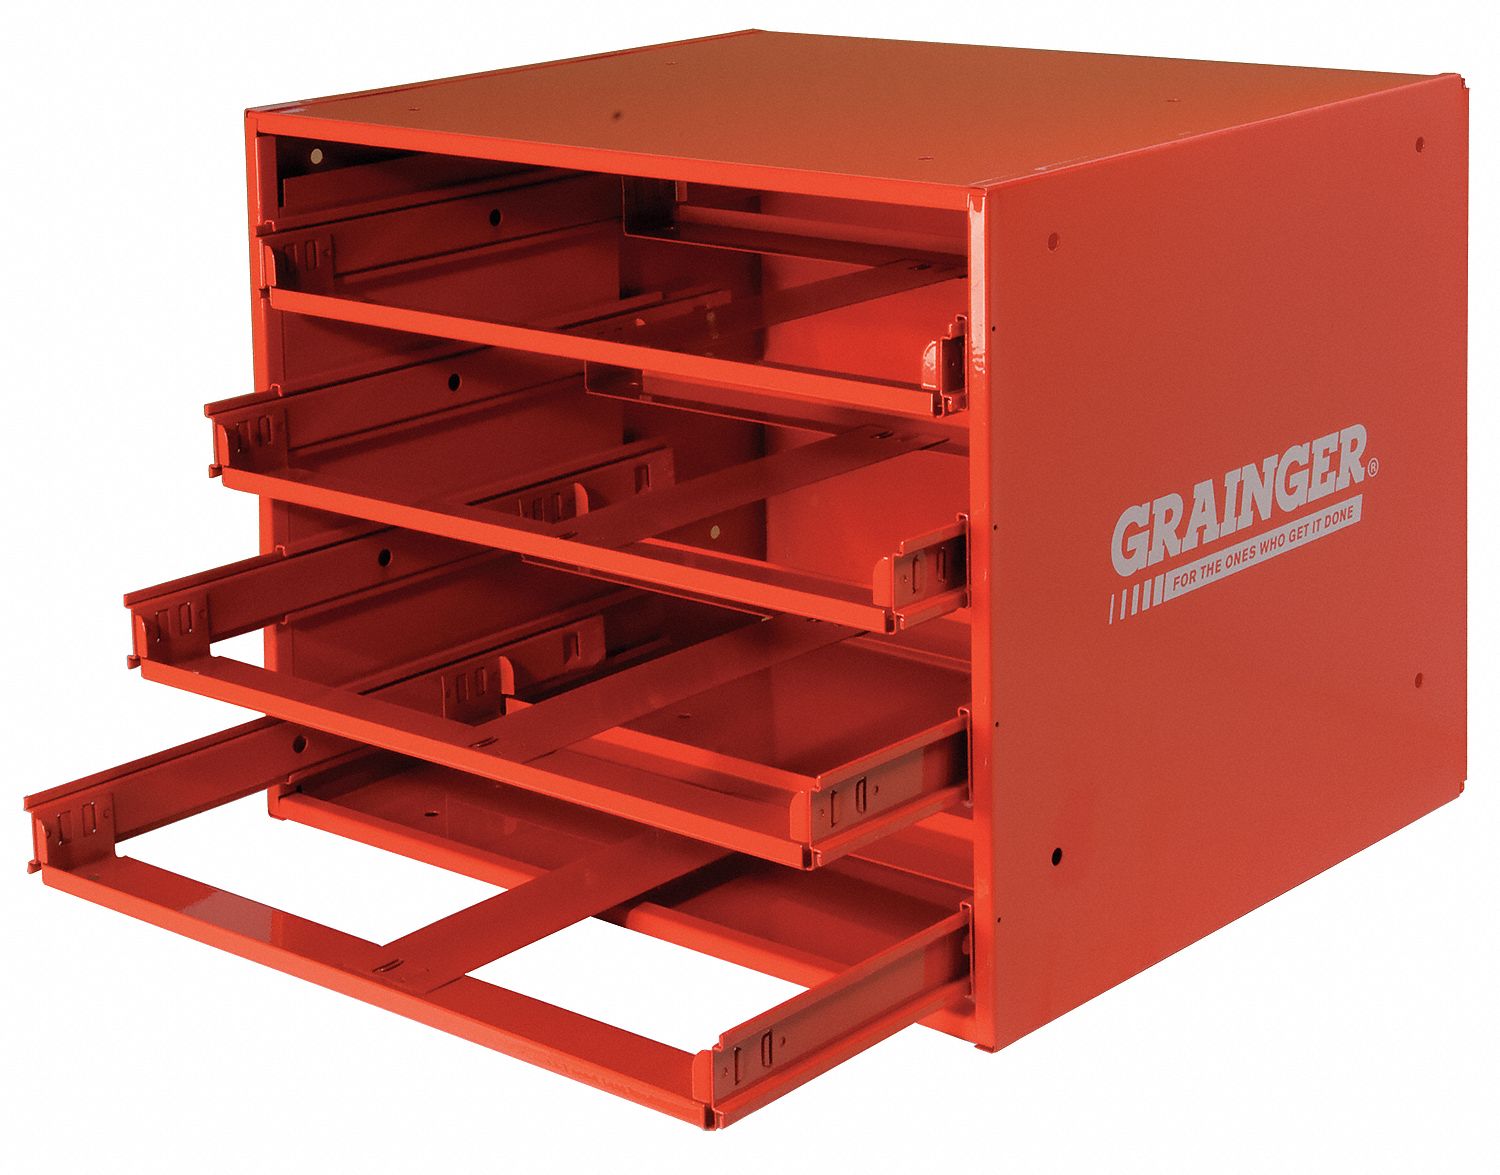 DURHAM Drawer,21 Compartments,Red 109-17-S1158 Red 